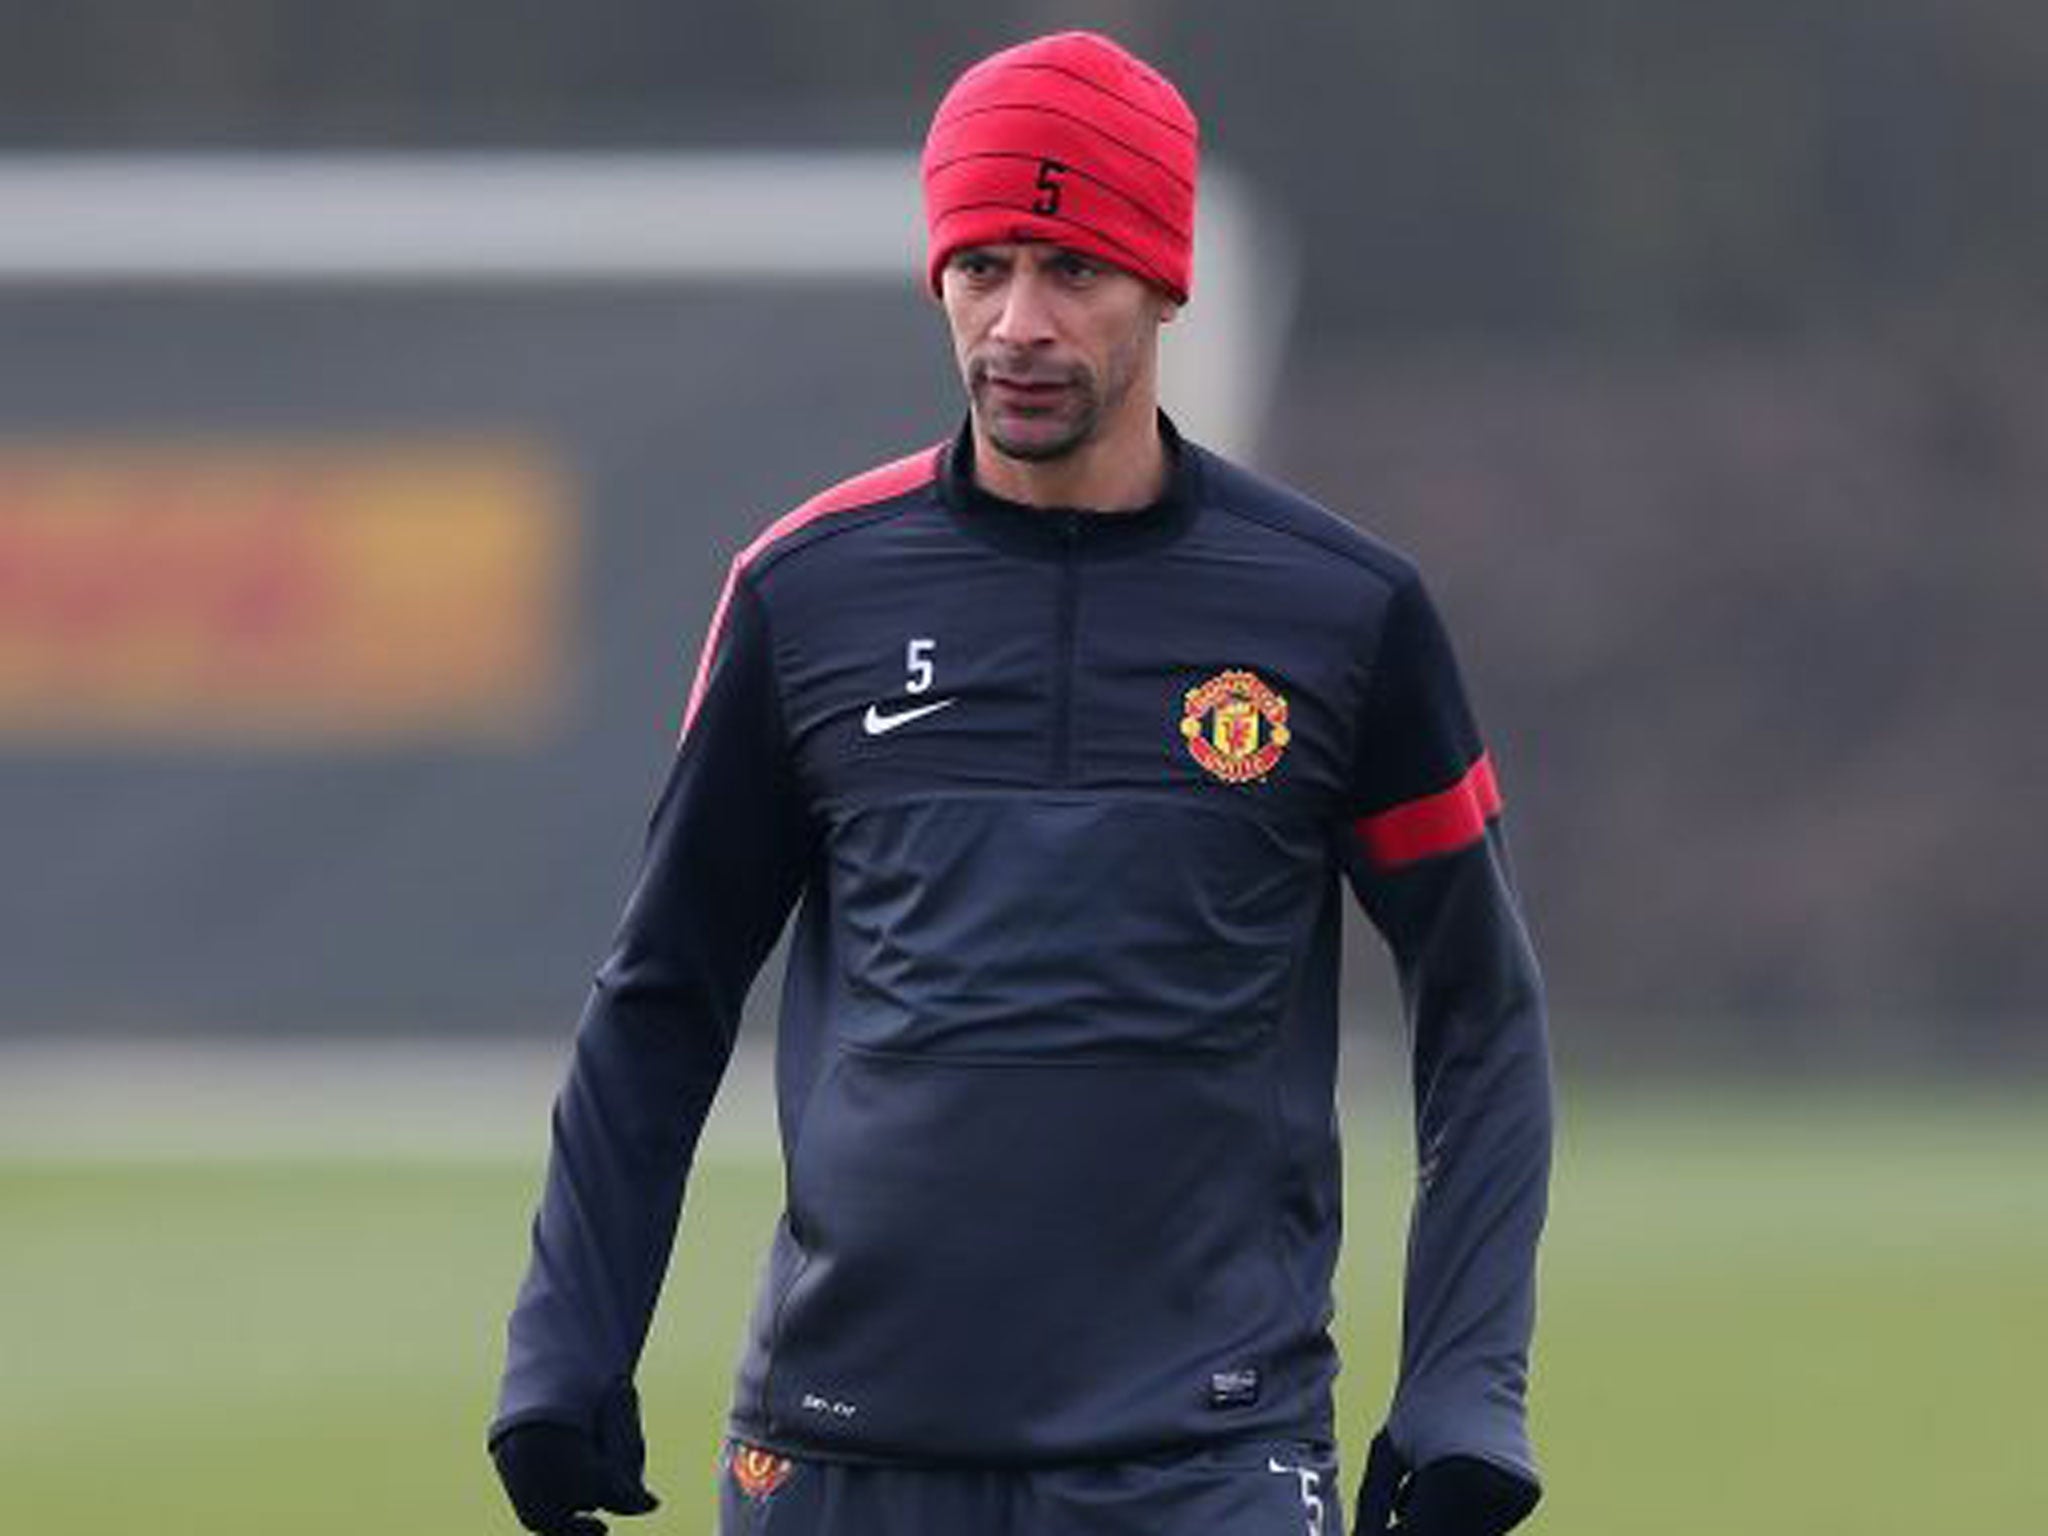 Rio Ferdinand has to cope with back and groin problems